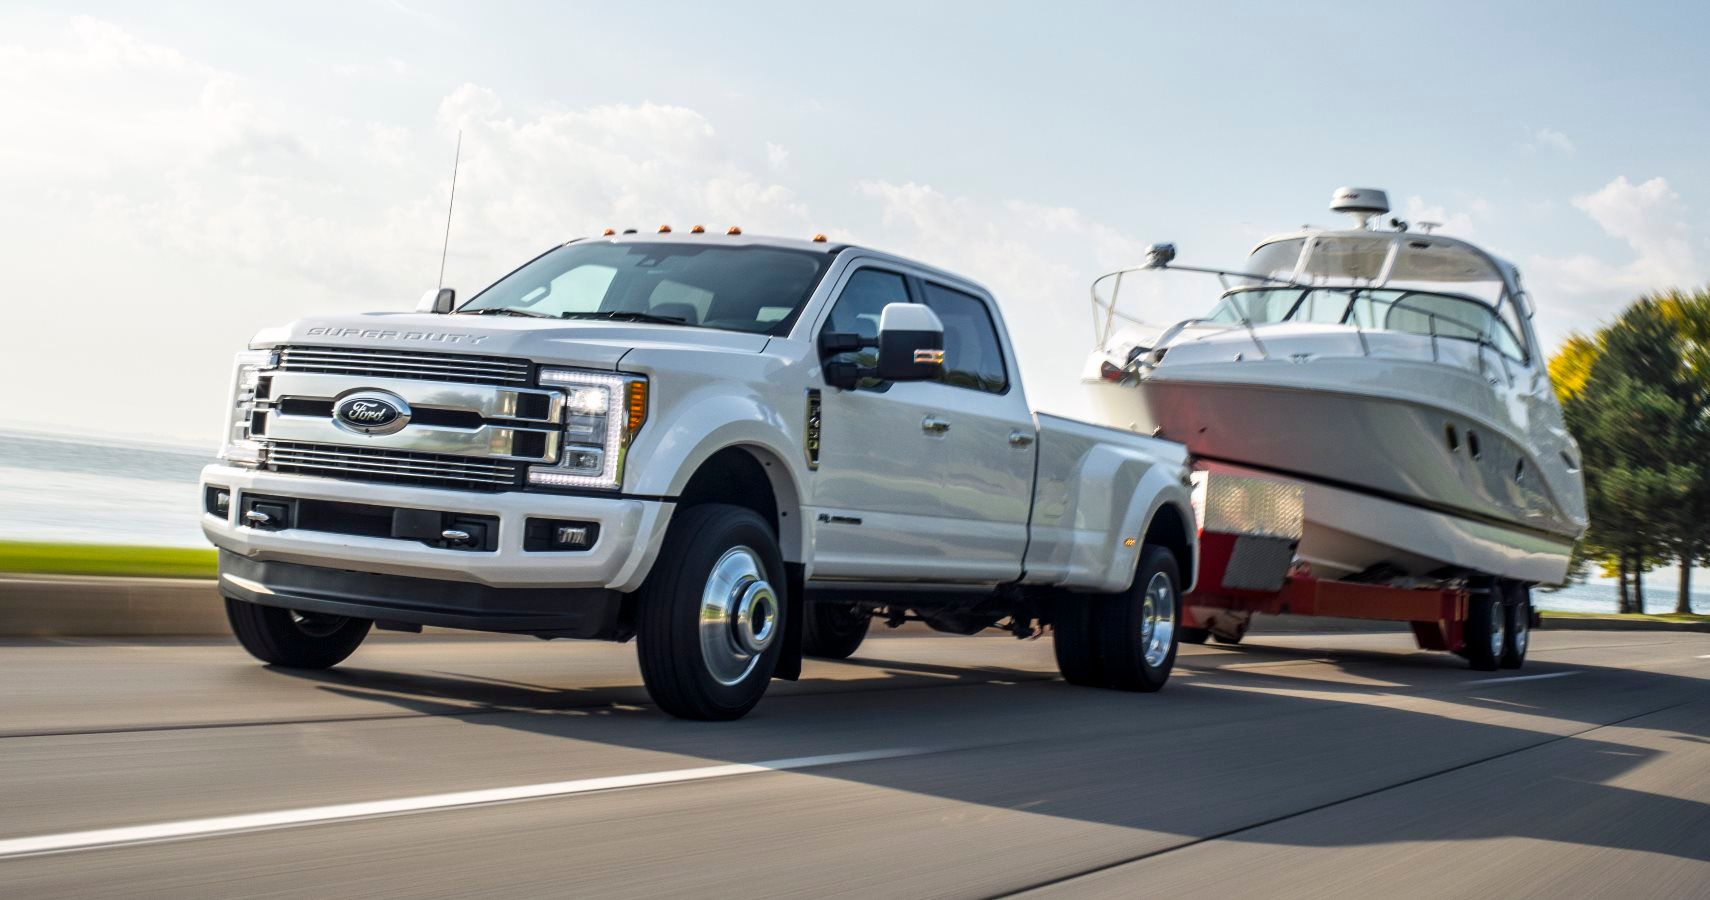 For the most demanding pickup truck customers, the 2018 Ford F-Series Super Duty works harder thanks to its newly upgraded 6.7-liter Power Stroke® V8 diesel engine offering best-in-class 450 horsepower and 935 lb.-ft. of torque